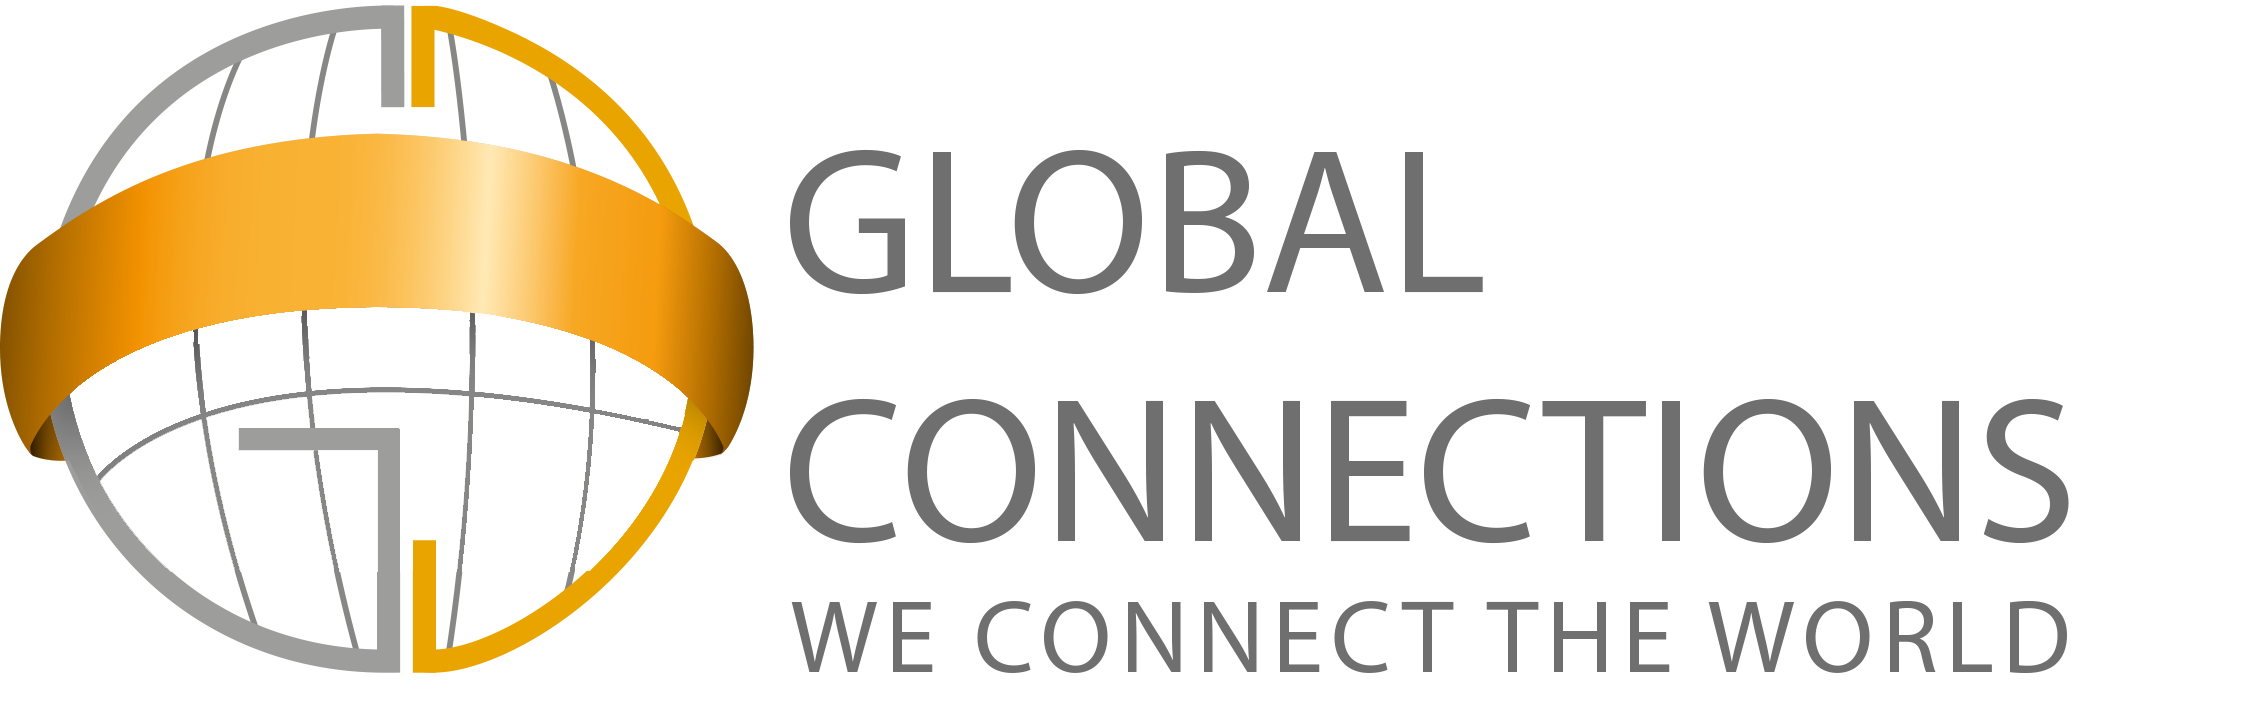 Global Connections